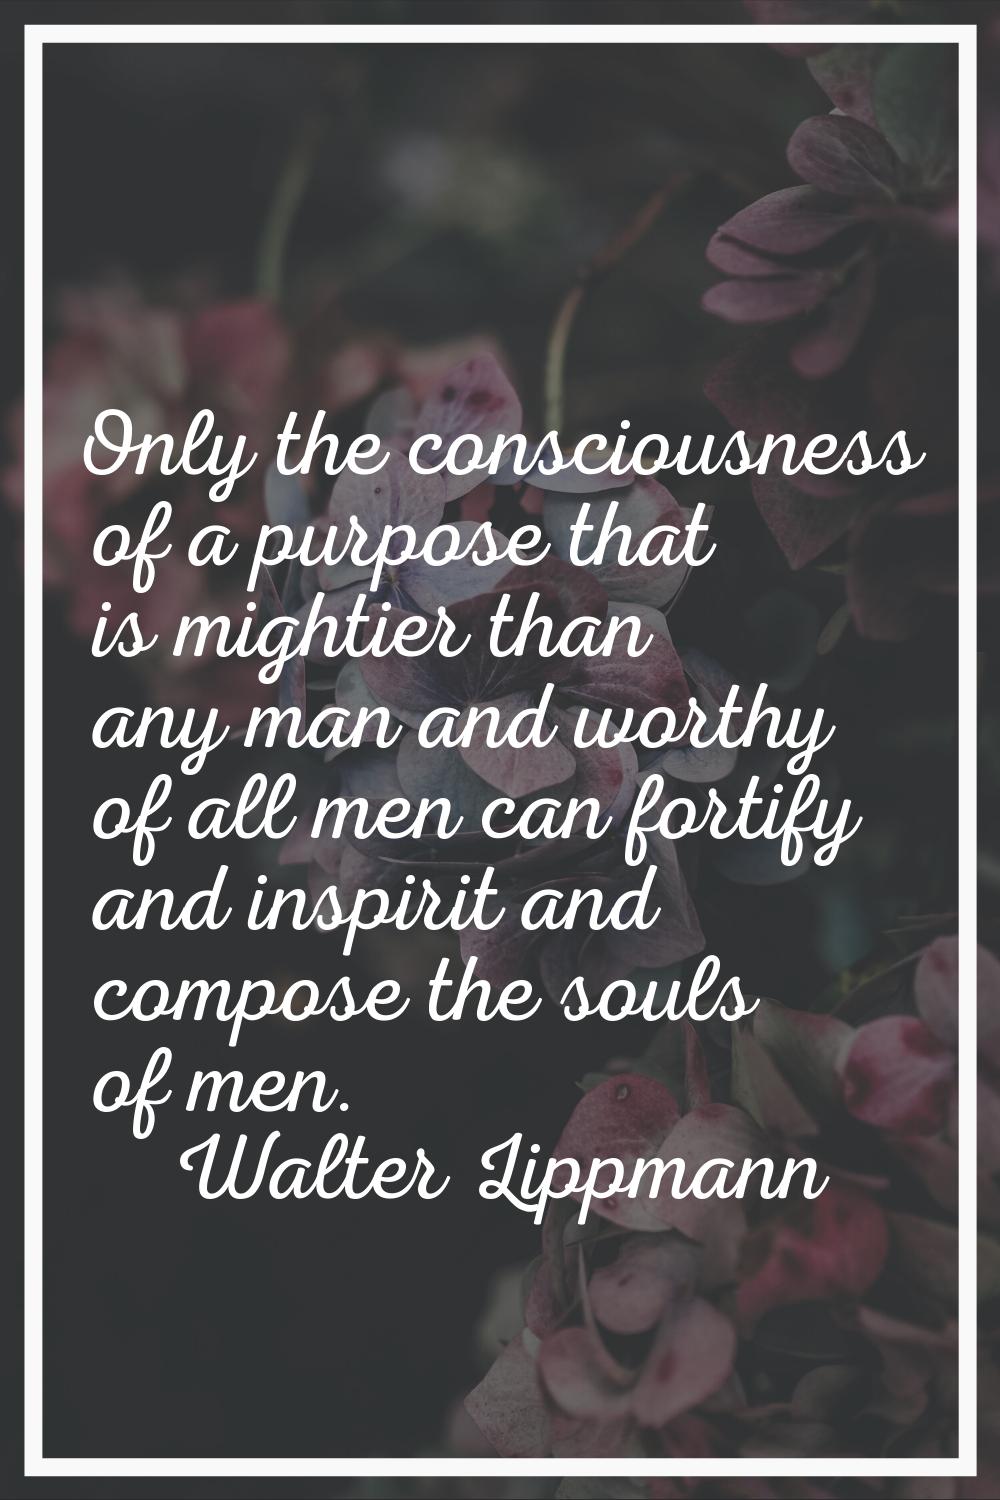 Only the consciousness of a purpose that is mightier than any man and worthy of all men can fortify